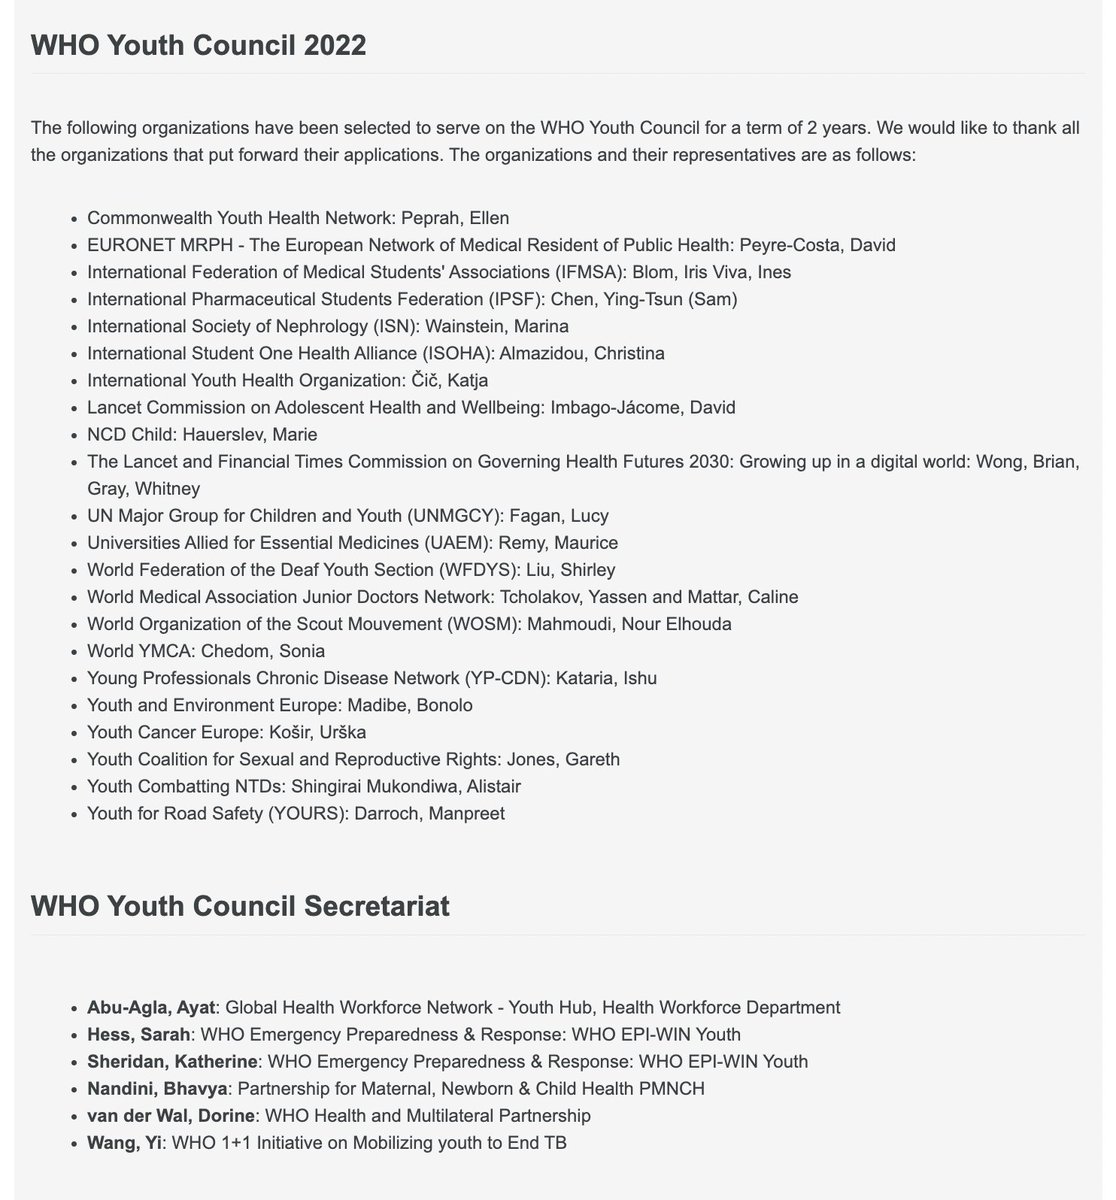 Humbled & honoured to have been appointed to the inaugural @WHO #Youth Council as a rep of @GHFutures2030! I look fwd to working w/ fellow Youth Council members & WHO Secretariat to continue to shape #meaningfulyouthengagement @ the highest level of #globalhealth decision-making!